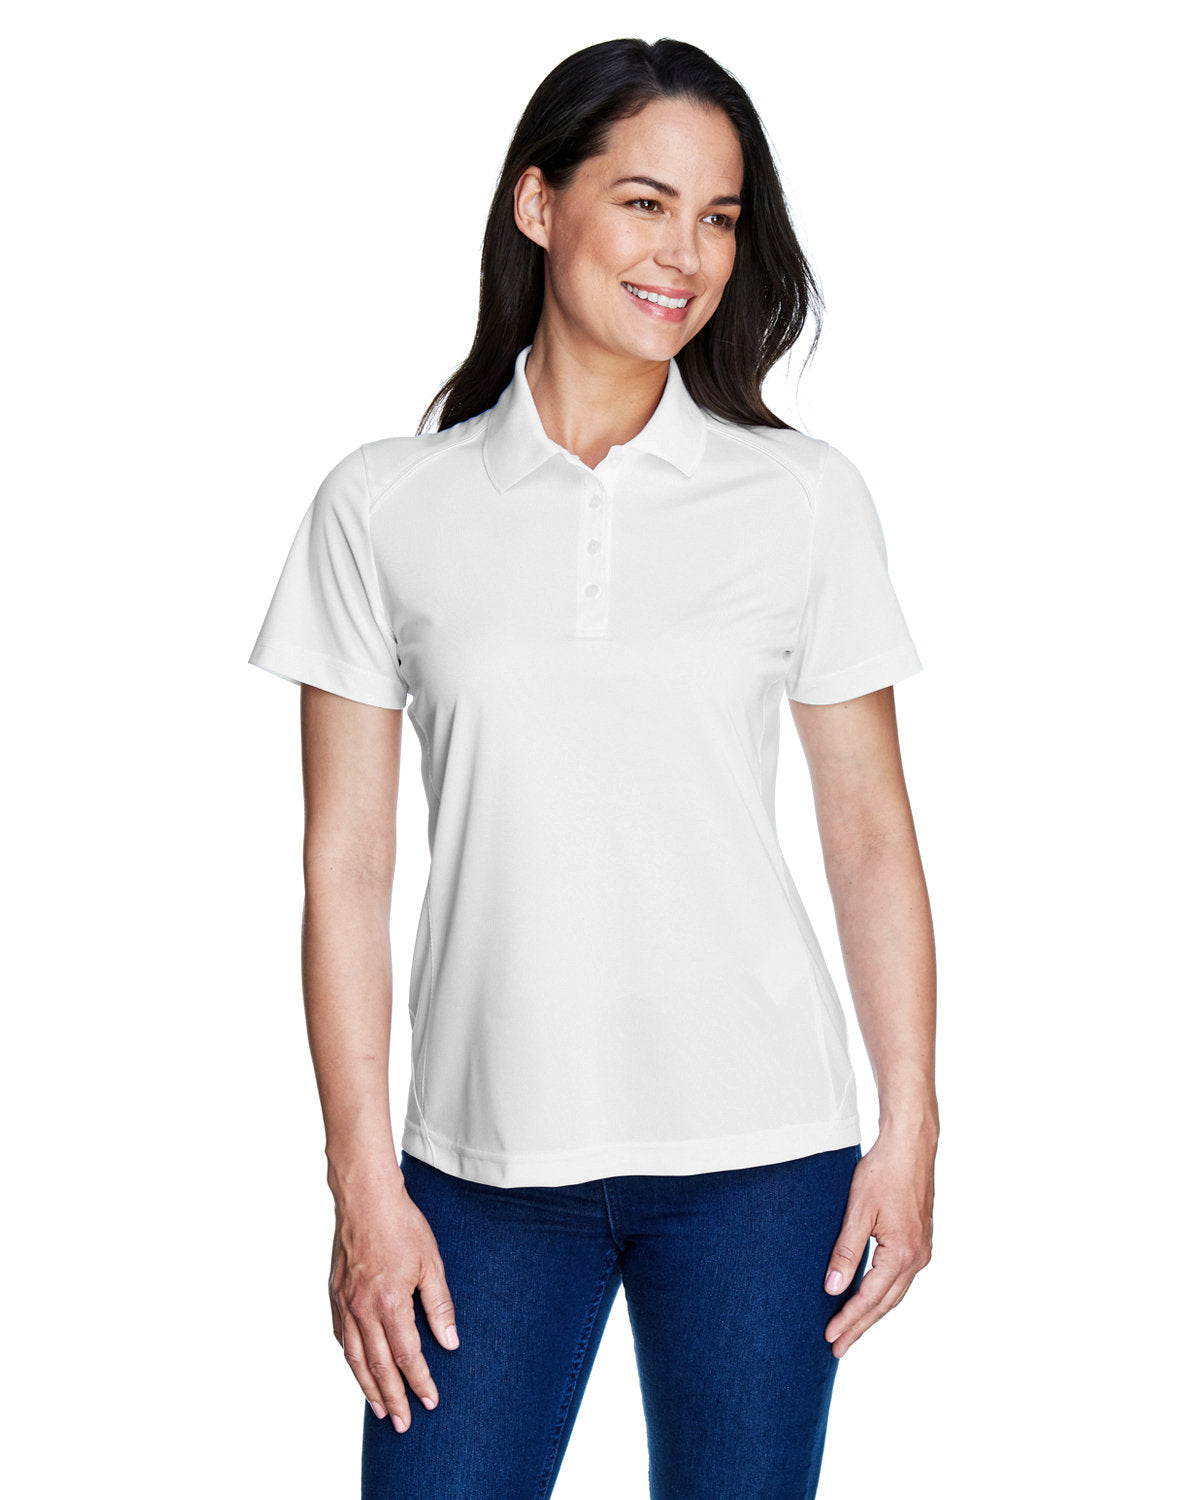 Ladies' Extreme Eperformance Shield Polo Shirt: Uncompromising Style